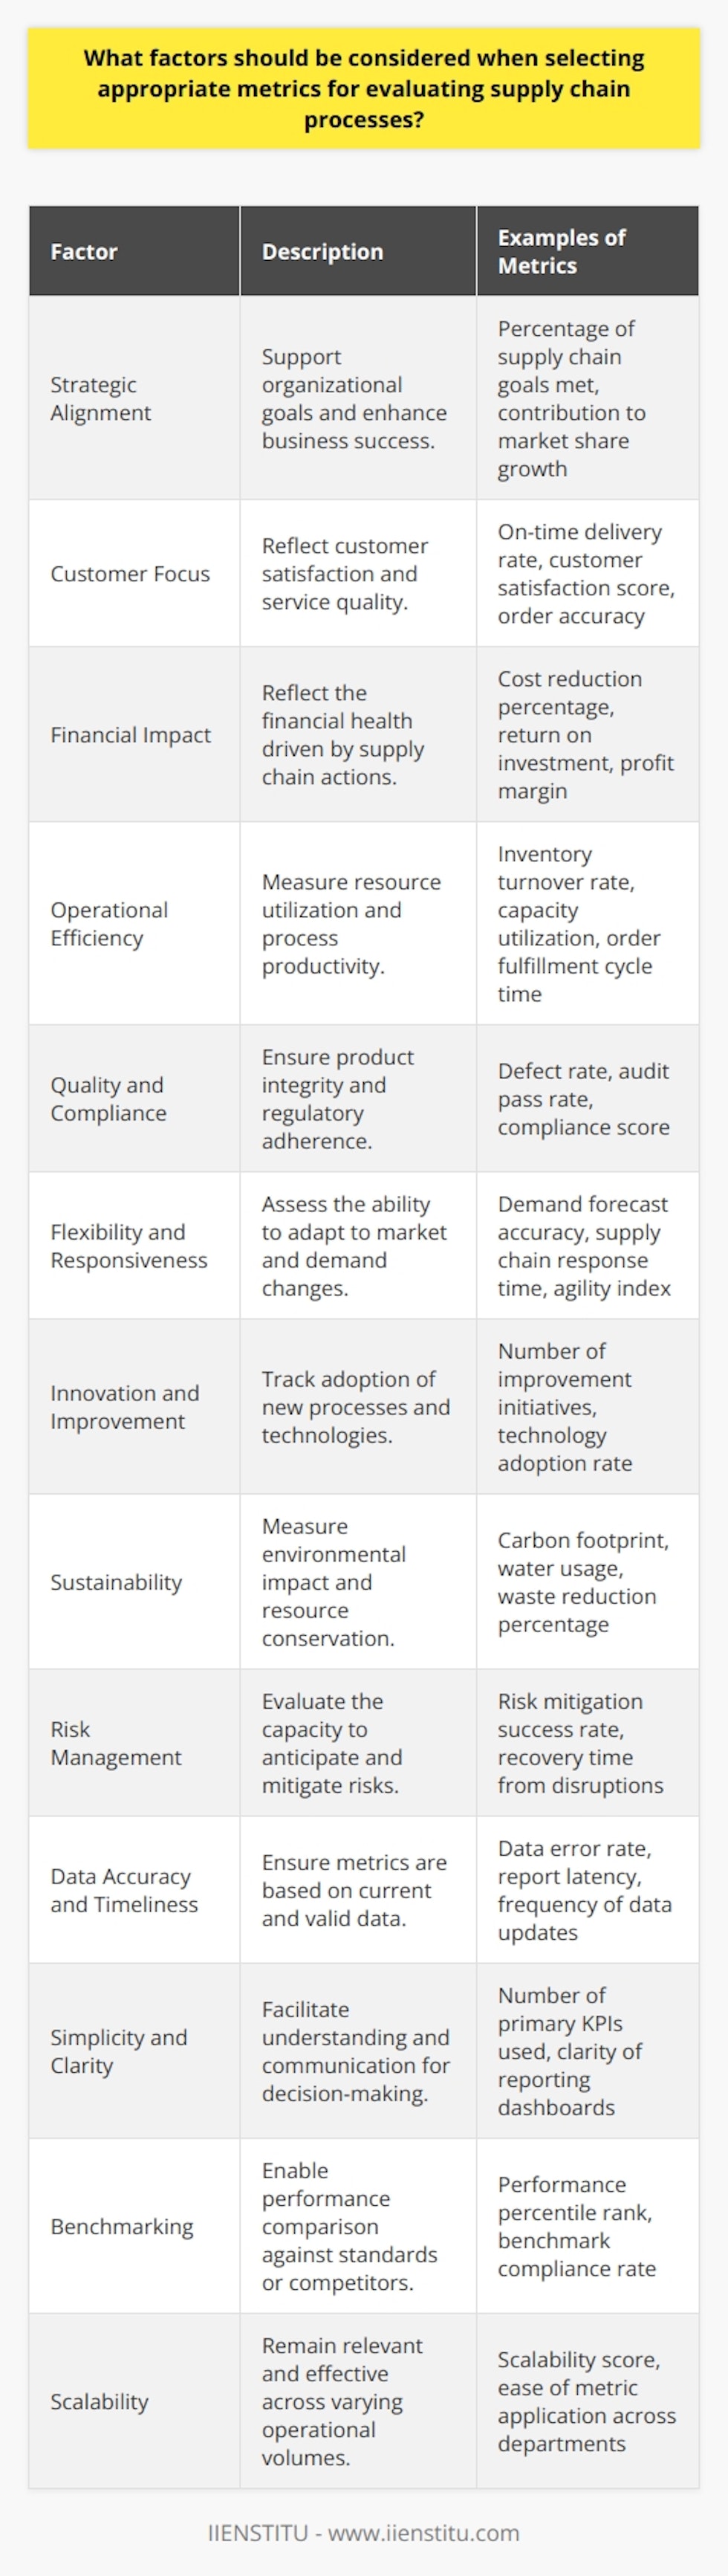 When evaluating supply chain processes, it is crucial to select metrics that accurately reflect performance, drive continuous improvement, and are aligned with strategic objectives. The appropriate metrics must capture efficiency, responsiveness, and quality, while also considering sustainability and the customer experience. Here are the key factors to consider in this selection process:1. Strategic Alignment: Metrics should support the strategic goals of the organization. Selecting metrics that are aligned with the company's vision and mission ensures that supply chain optimization contributes directly to business success.2. Customer Focus: Metrics should reflect customer satisfaction and service levels. Consider factors such as on-time delivery, order accuracy, and returns processing, as these directly impact customer experience.3. Financial Impact: Metrics related to cost control, profit margins, and investment returns are critical. Select metrics that demonstrate the financial benefits of supply chain improvements and how they contribute to the bottom line.4. Operational Efficiency: Metrics should measure how well supply chain processes utilize resources. Look at inventory turnover rates, capacity utilization, and order fulfilment times to assess operational productivity.5. Quality and Compliance: Quality metrics track error rates, defect levels, and compliance with regulations and standards. These metrics help maintain product integrity and customer trust.6. Flexibility and Responsiveness: Metrics should capture the supply chain's ability to adapt to changes. Measure how quickly the supply chain can respond to spikes in demand, supply disruptions, and market fluctuations.7. Innovation and Improvement: Track metrics that reflect the supply chain's drive for continuous improvement and innovation. This could include measures around the adoption of new technologies or process improvement initiatives.8. Sustainability: Incorporate metrics that assess the environmental impact of the supply chain operations. These could include carbon footprint, water usage, and waste reduction.9. Risk Management: Select metrics that evaluate the ability to anticipate and mitigate risks. This ensures that the supply chain is resilient and can handle unforeseen events.10. Data Accuracy and Timeliness: Metrics should be based on reliable and up-to-date data. Ensure the chosen metrics can be consistently measured and reported with accuracy.11. Simplicity and Clarity: Choose metrics that are easy to understand and communicate. Simple, clear metrics enable better decision-making and help avoid confusion and misalignment of efforts.12. Benchmarking: Metrics should allow for benchmarking performance against industry standards or competitors. This provides context to performance and highlights areas of competitive advantage or improvement.13. Scalability: Metrics need to be scalable as the business grows. They should be relevant for different volumes and complexities of operations.Remember, no single metric can offer a complete view of the supply chain performance, so it is essential to use a balanced scorecard approach when selecting the appropriate metrics. By considering these key factors, organizations can effectively monitor and evaluate their supply chain processes, driving improvements that enhance overall competitiveness and customer satisfaction.